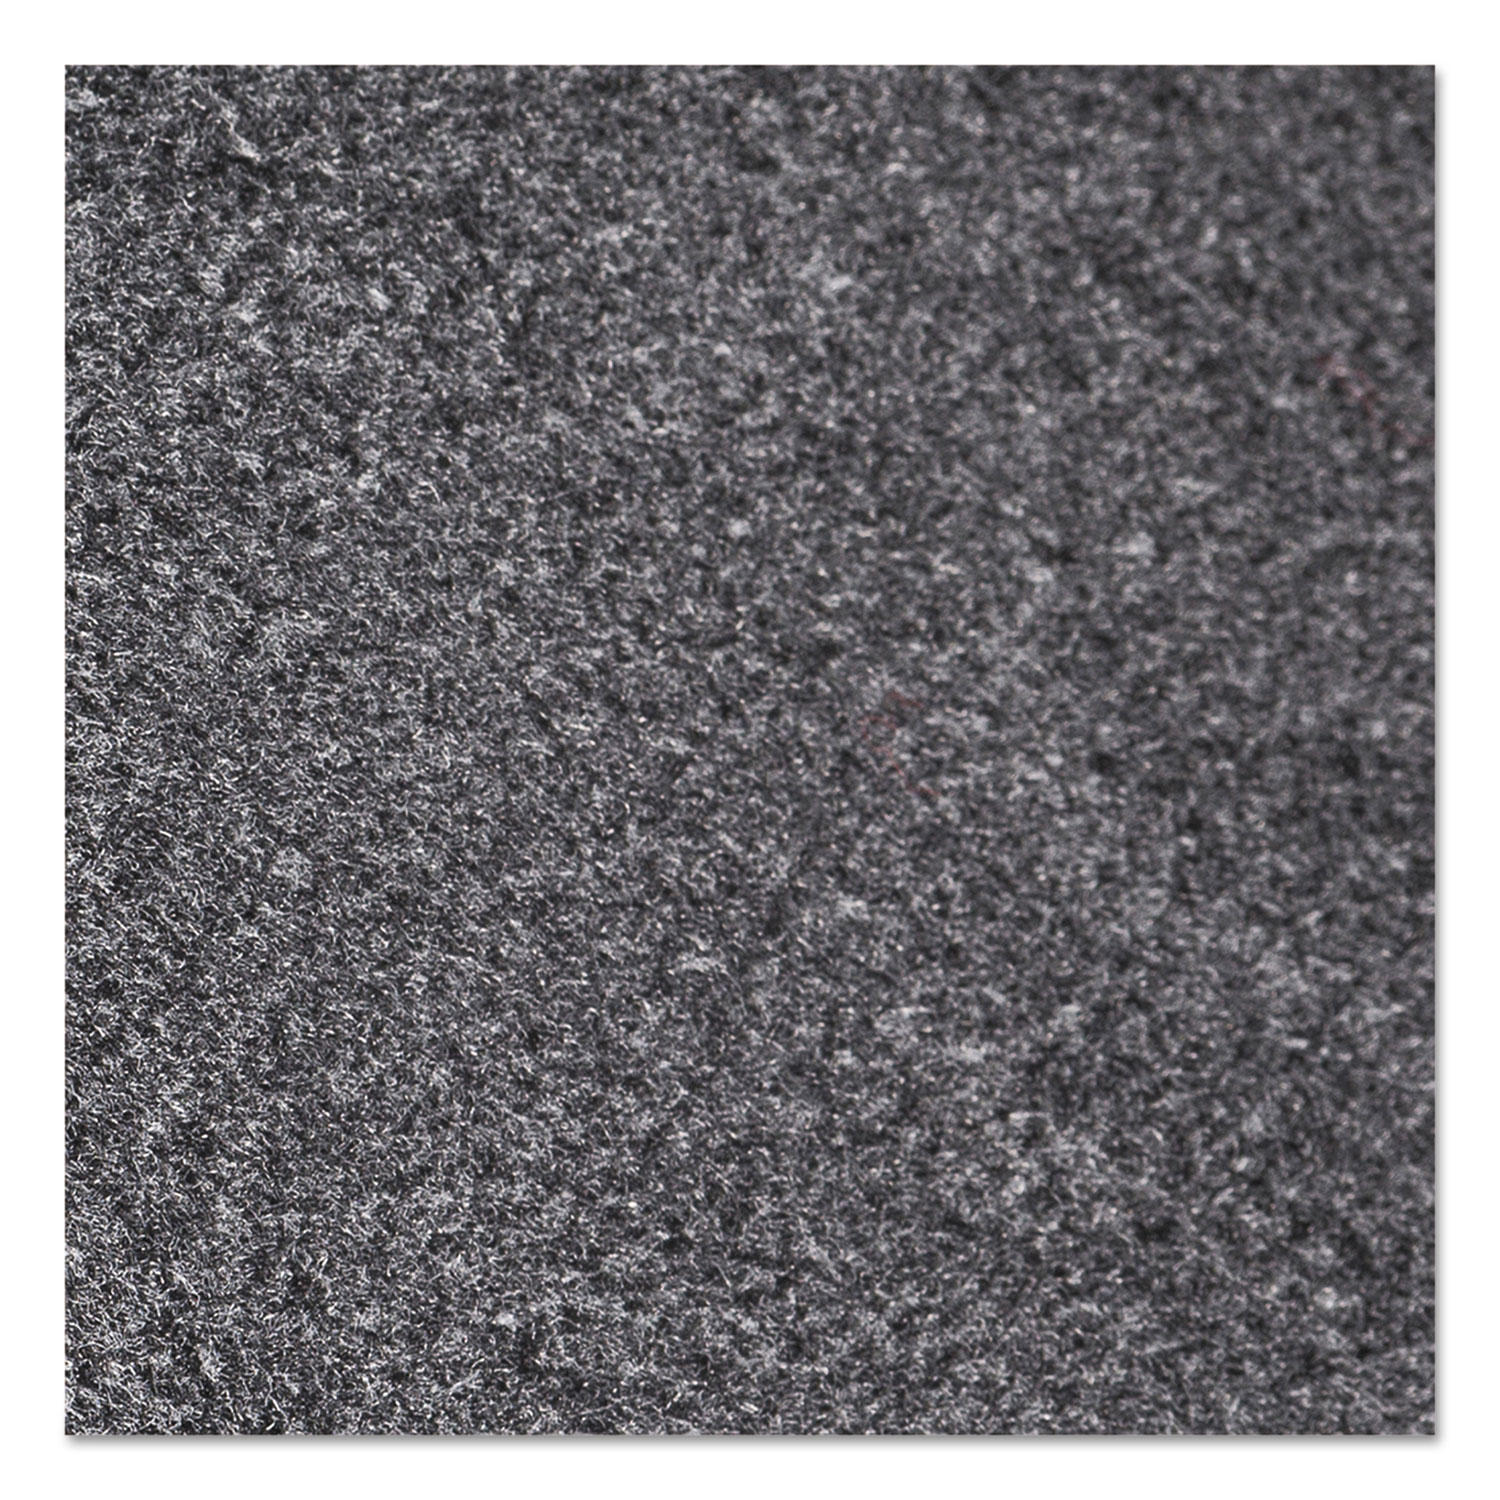 Rely-On Olefin Indoor Wiper Mat, 36 x 48, Charcoal